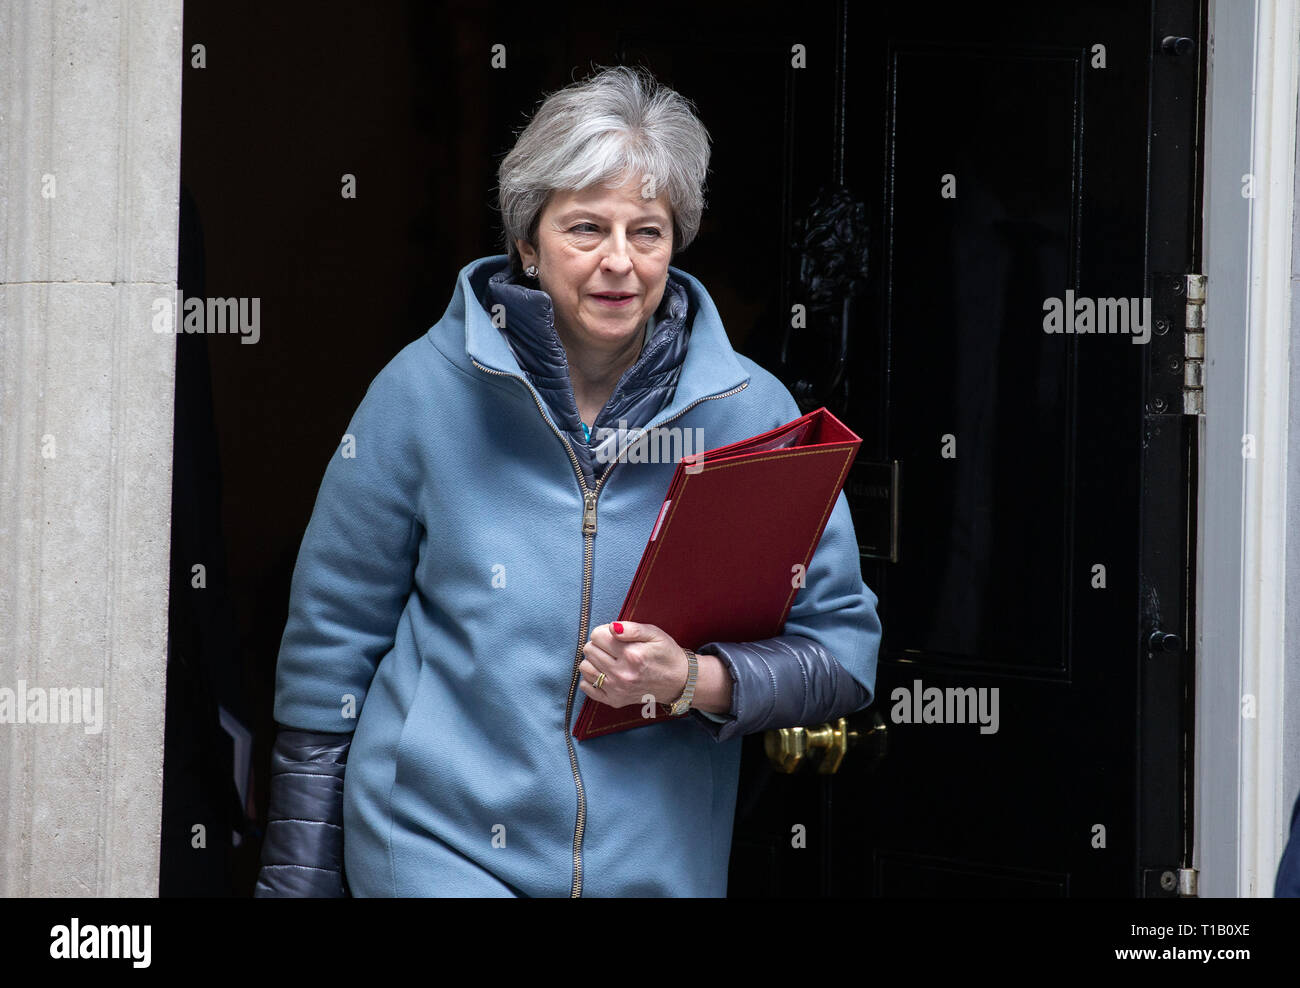 London, UK. 25th Mar, 2019. Prime Minister, Theresa May, leaves 10 Downing street after the Cabinet meeting to go to Parliament. She is trying to gather support from MPs for her third 'Meaningful vote'. Credit: Tommy London/Alamy Live News Stock Photo